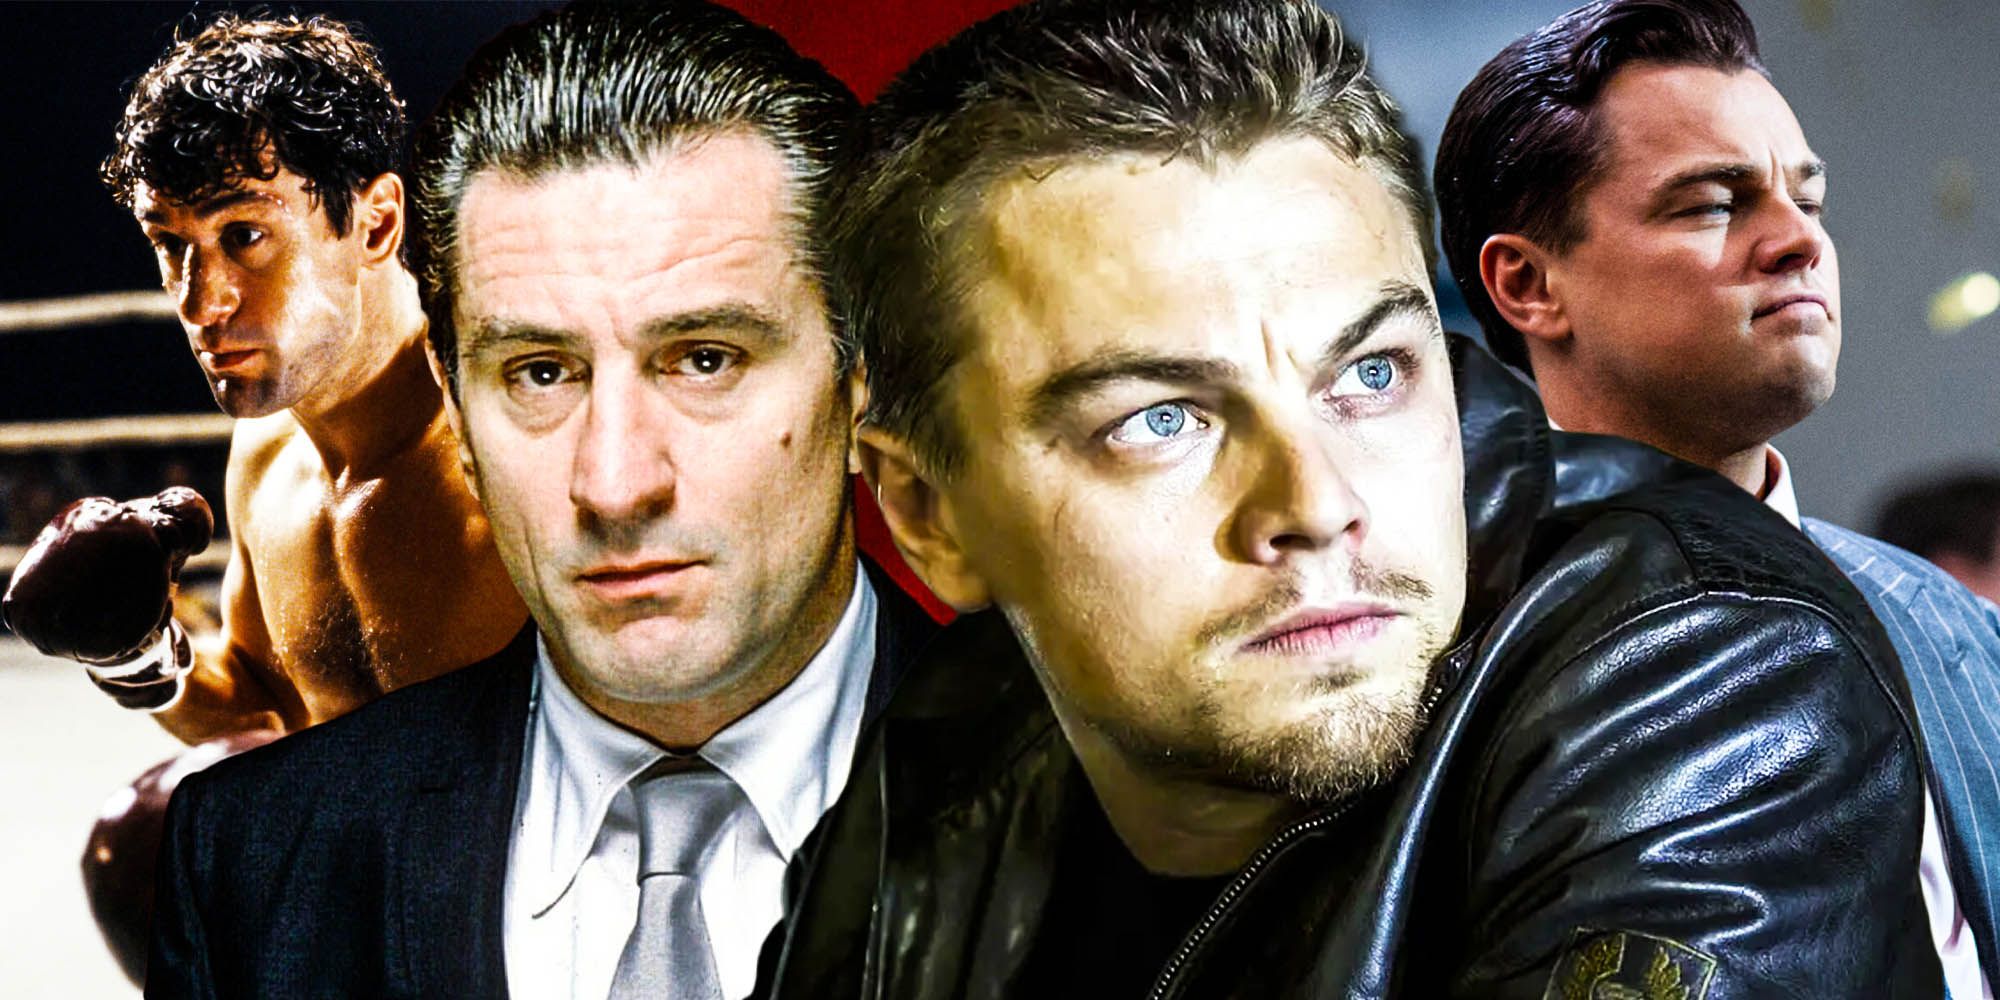 Why Martin Scorsese casts De Niro and Dicaprio in so many movies The departed Wolf of wall street goodfellas raging bull